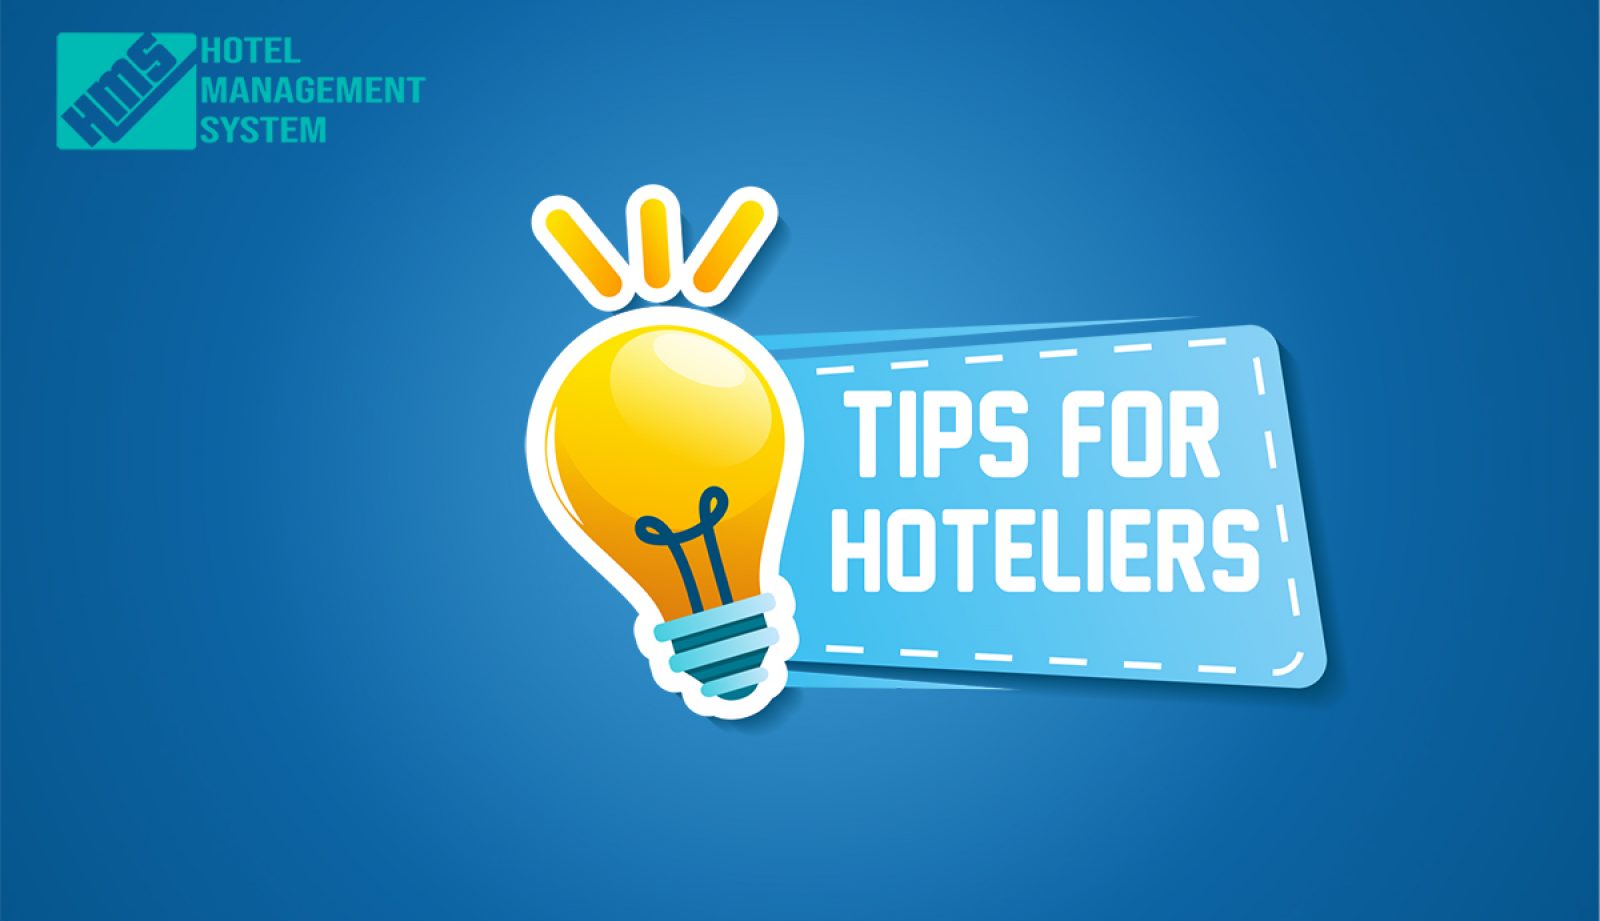 Tips for Hoteliers